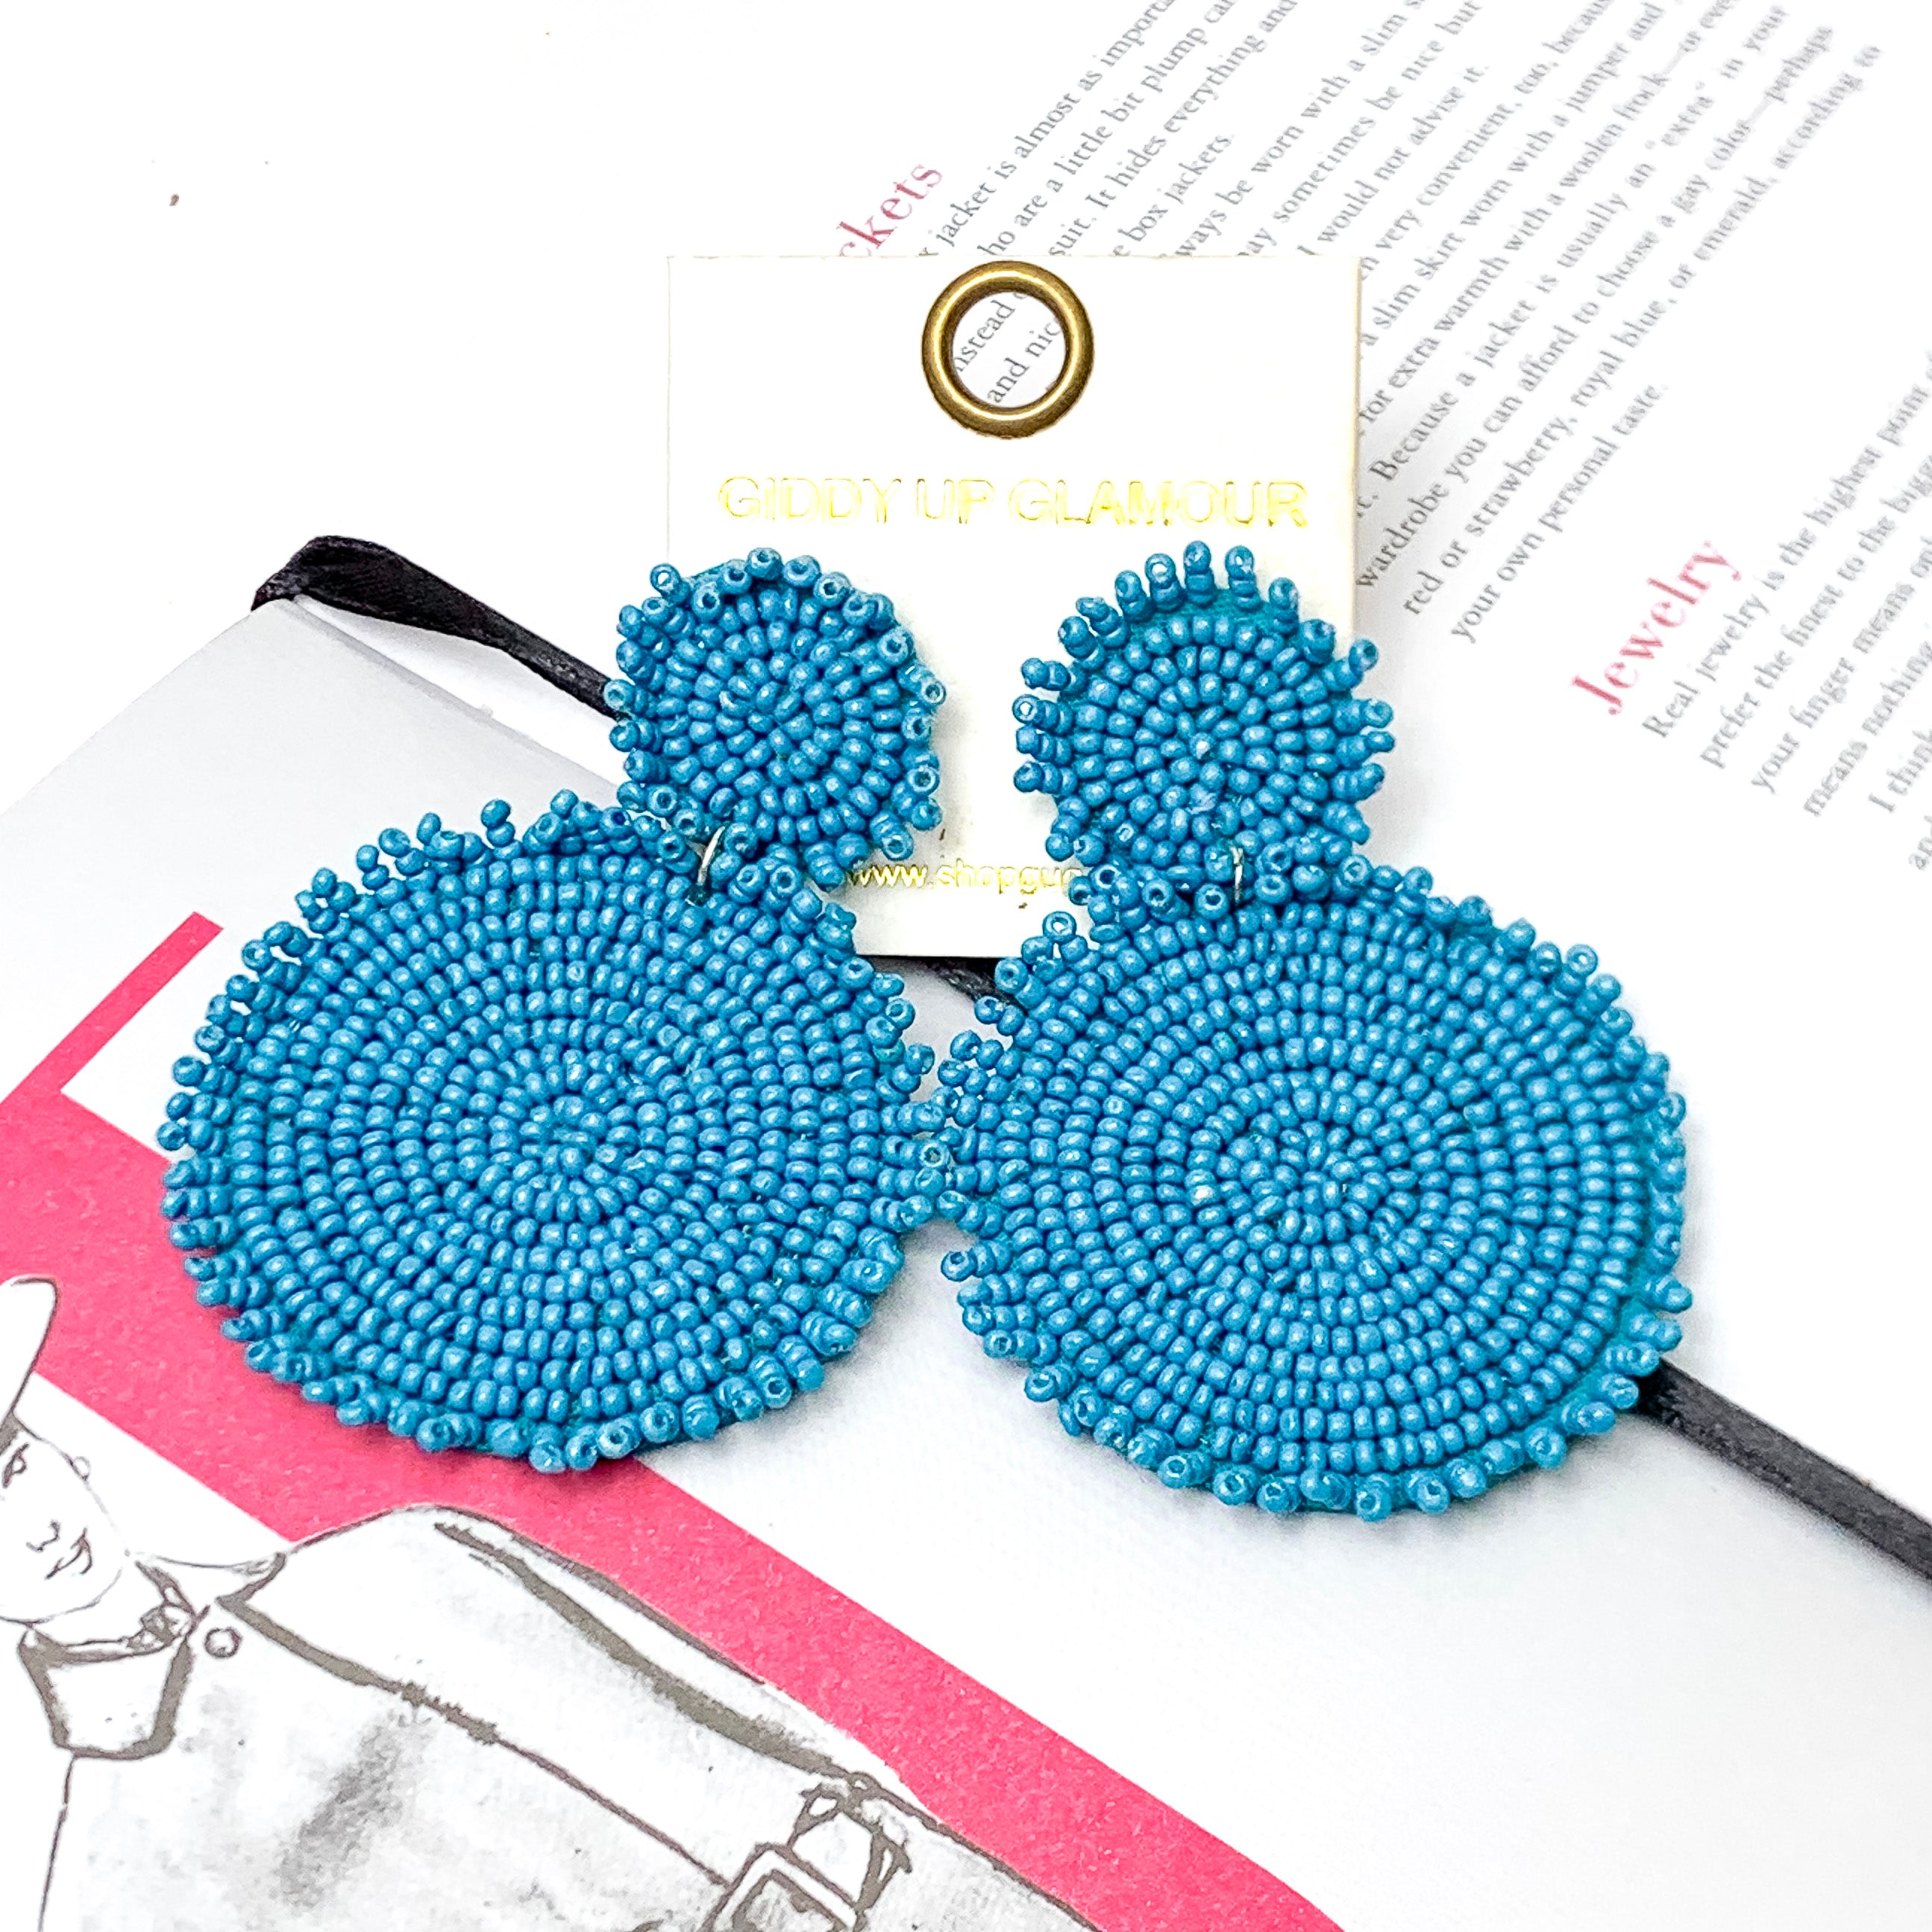 Circle Drop Two Tiered Beaded Earrings in Teal Blue - Giddy Up Glamour Boutique